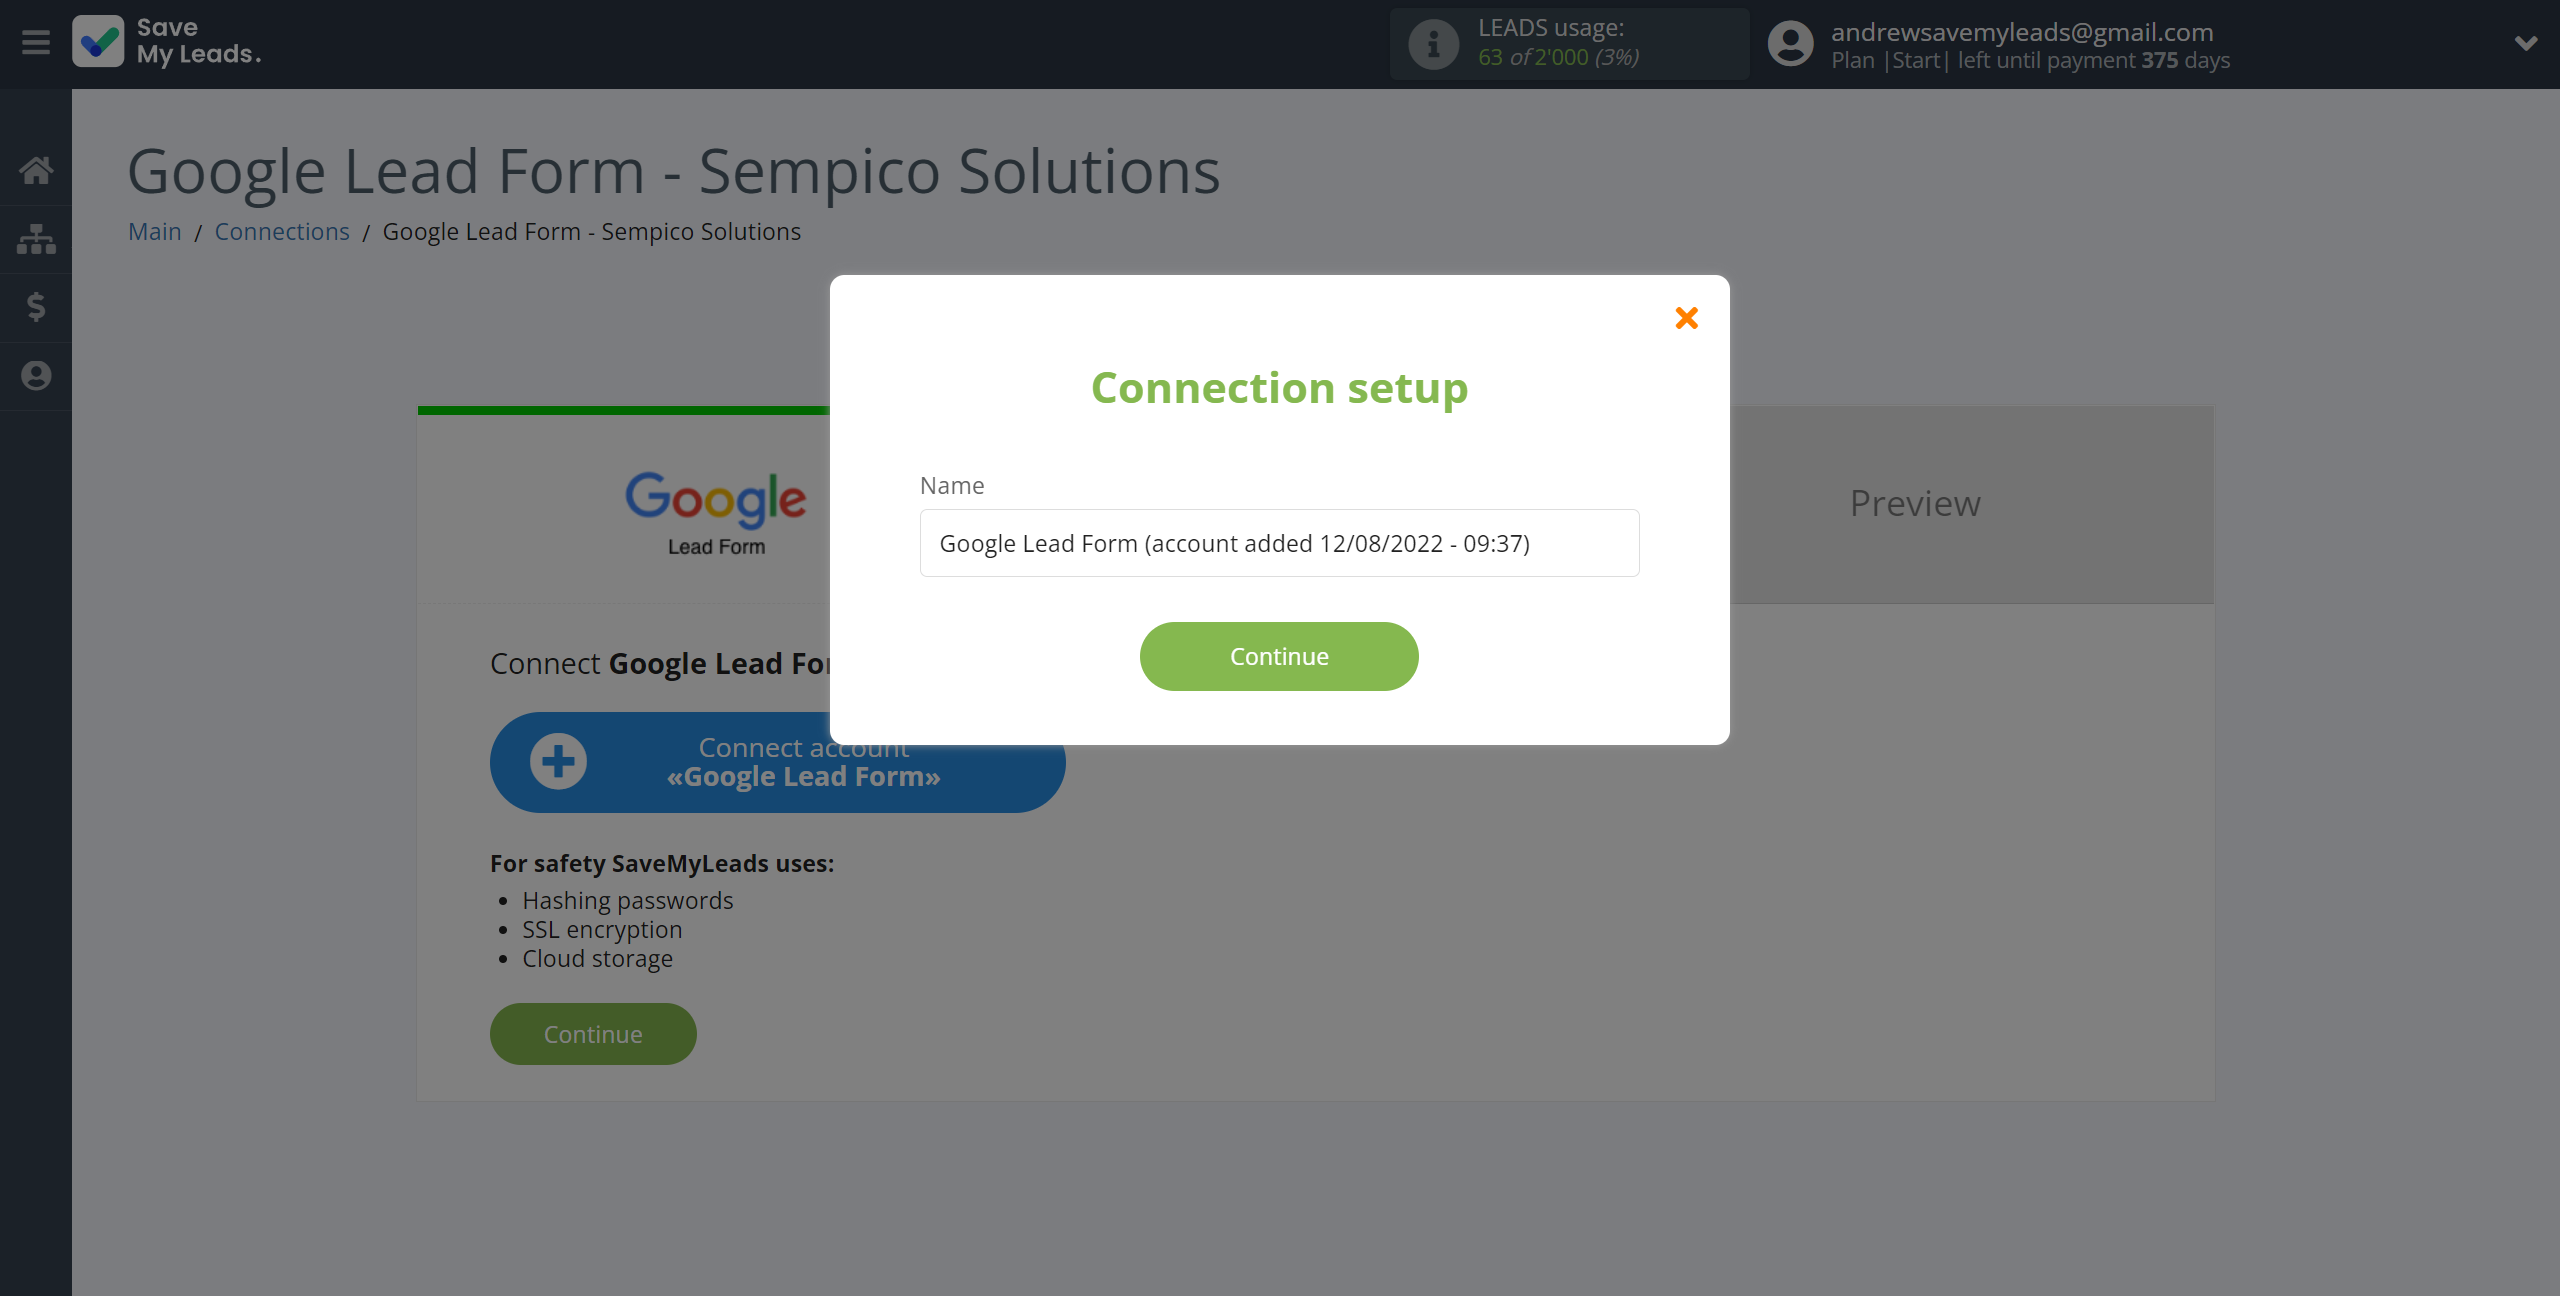 How to Connect Google Lead Form with Sempico Solutions | Data Source account connection